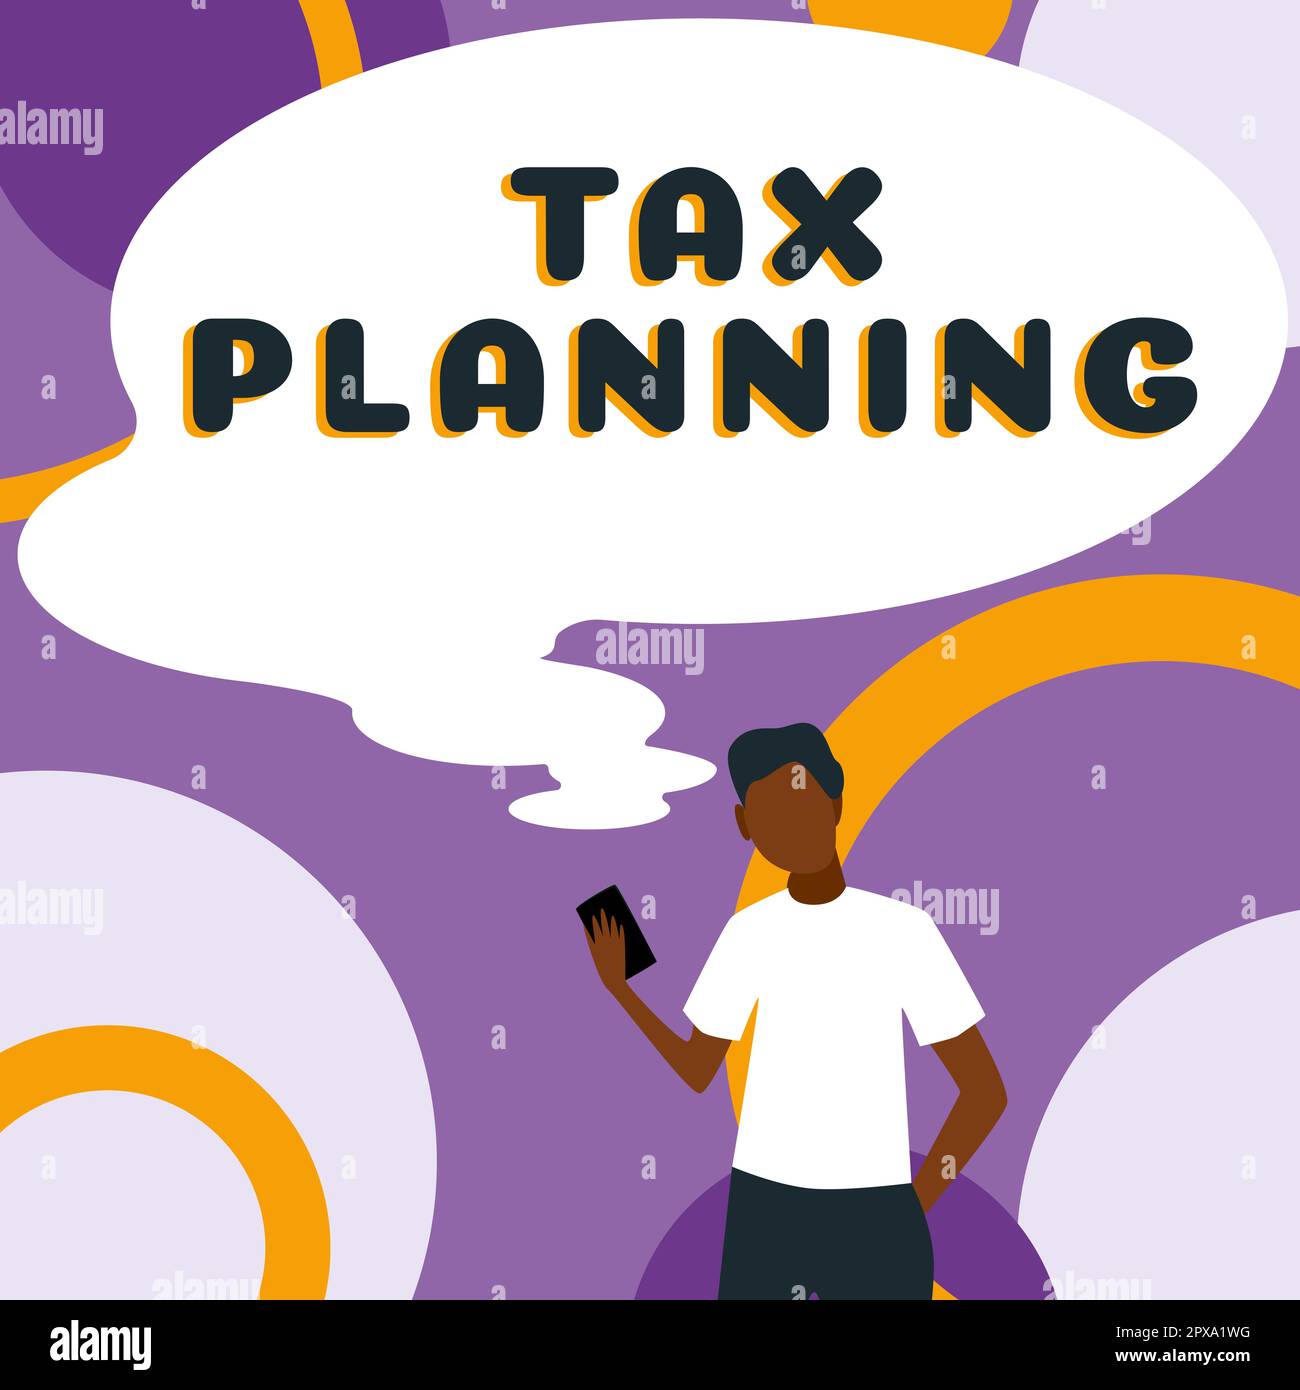 Sign displaying Tax Planning, Business overview analysis of financial situation or plan from a tax perspective Stock Photo